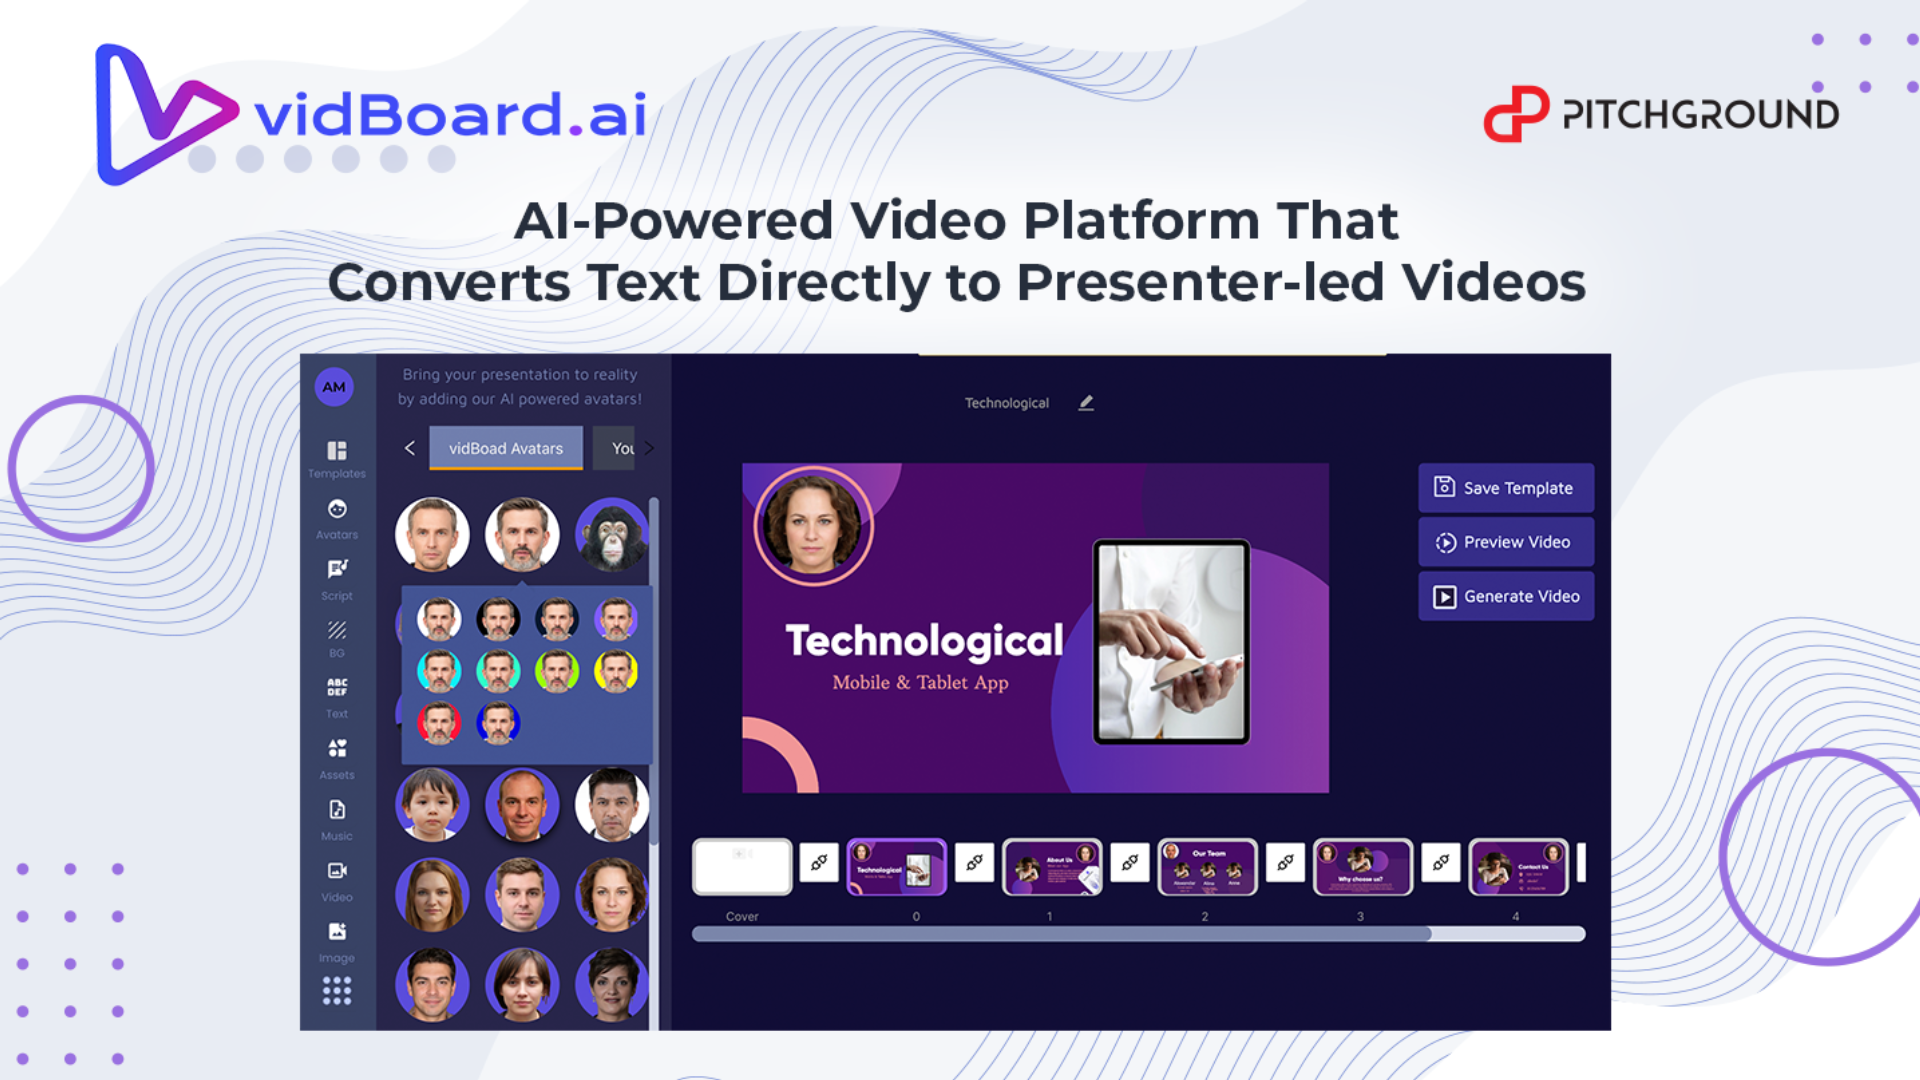 Lifetime Deal to vidBoard.ai: Plan C for $397